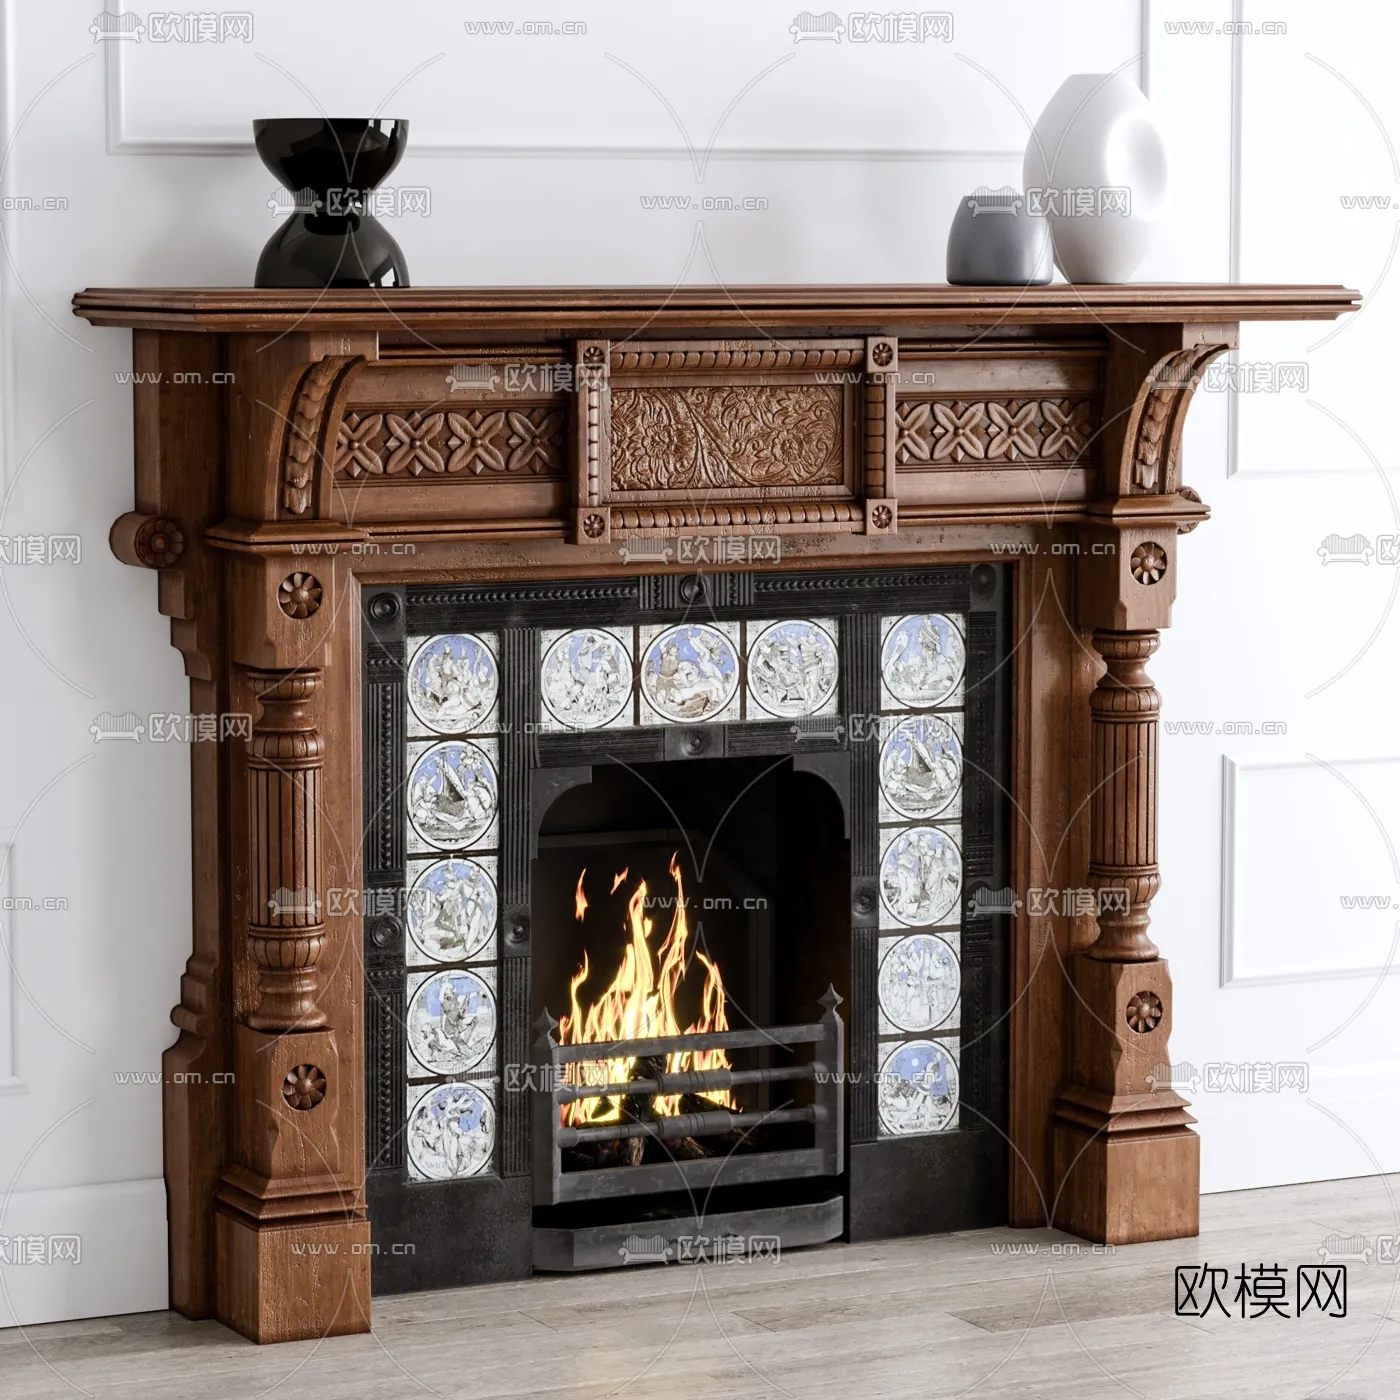 CLASSIC – FIREPLACE 3DMODELS – 023